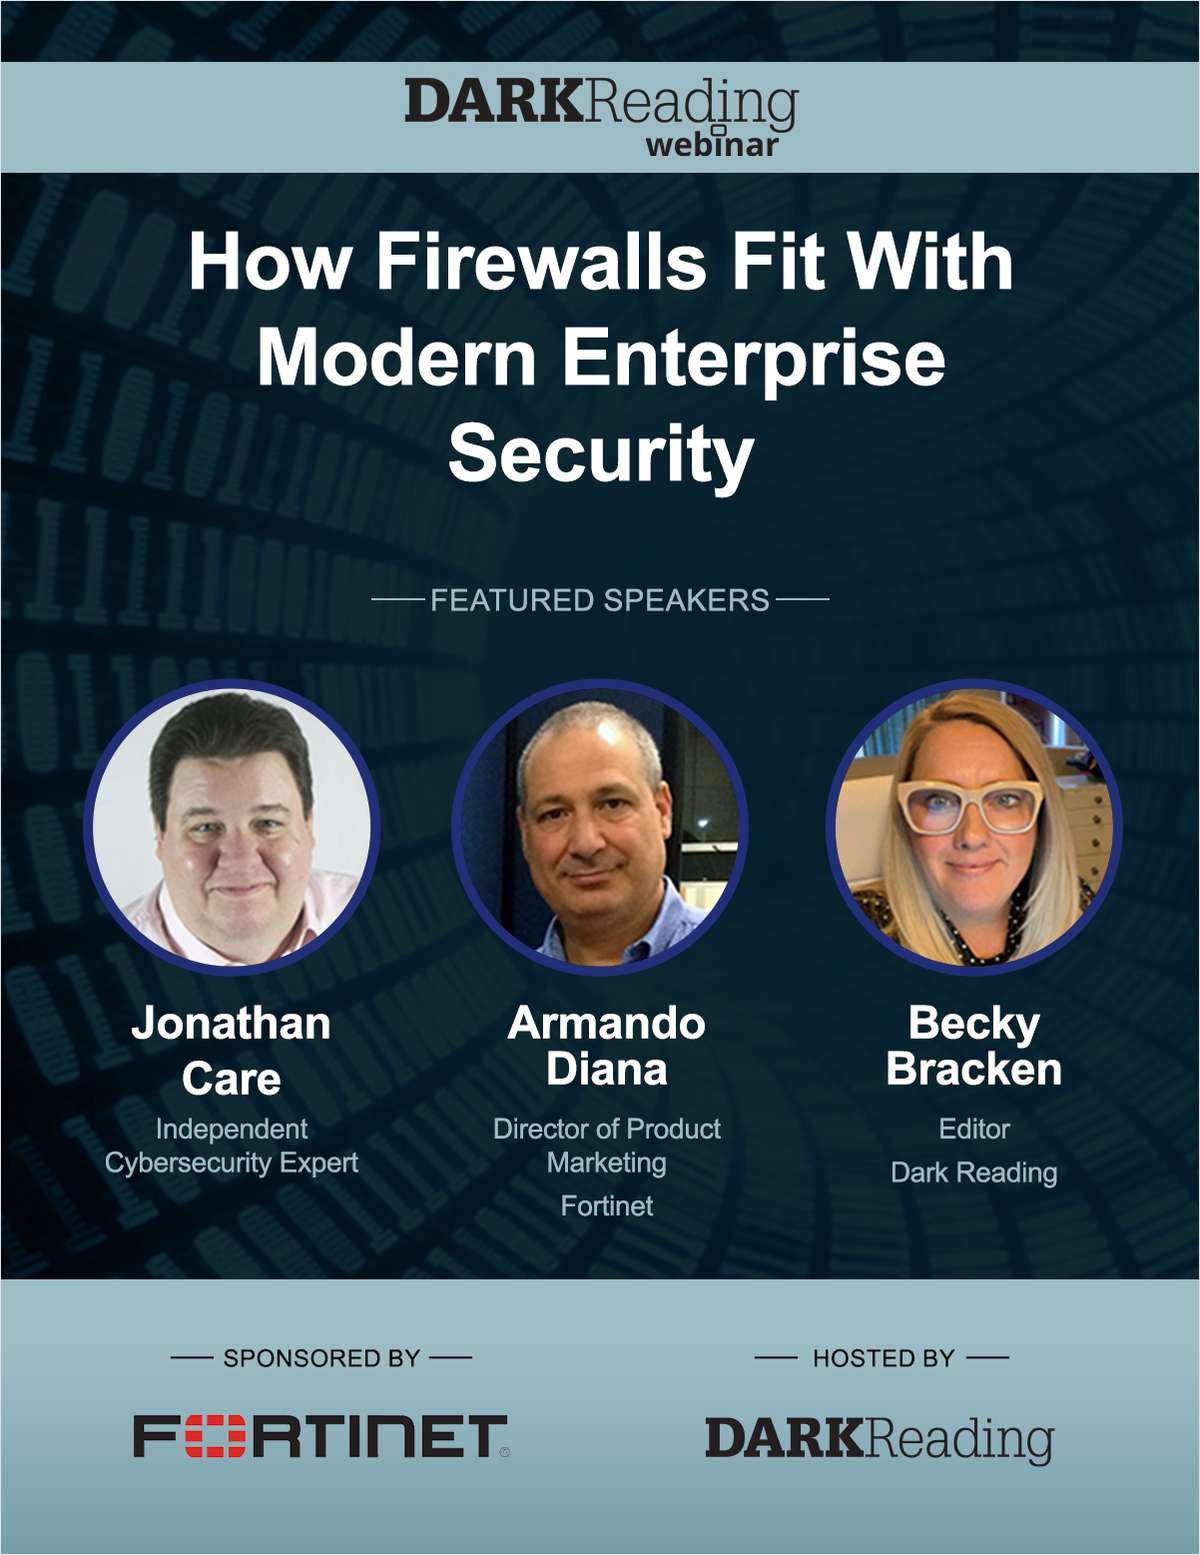 How Firewalls Fit With Modern Enterprise Security